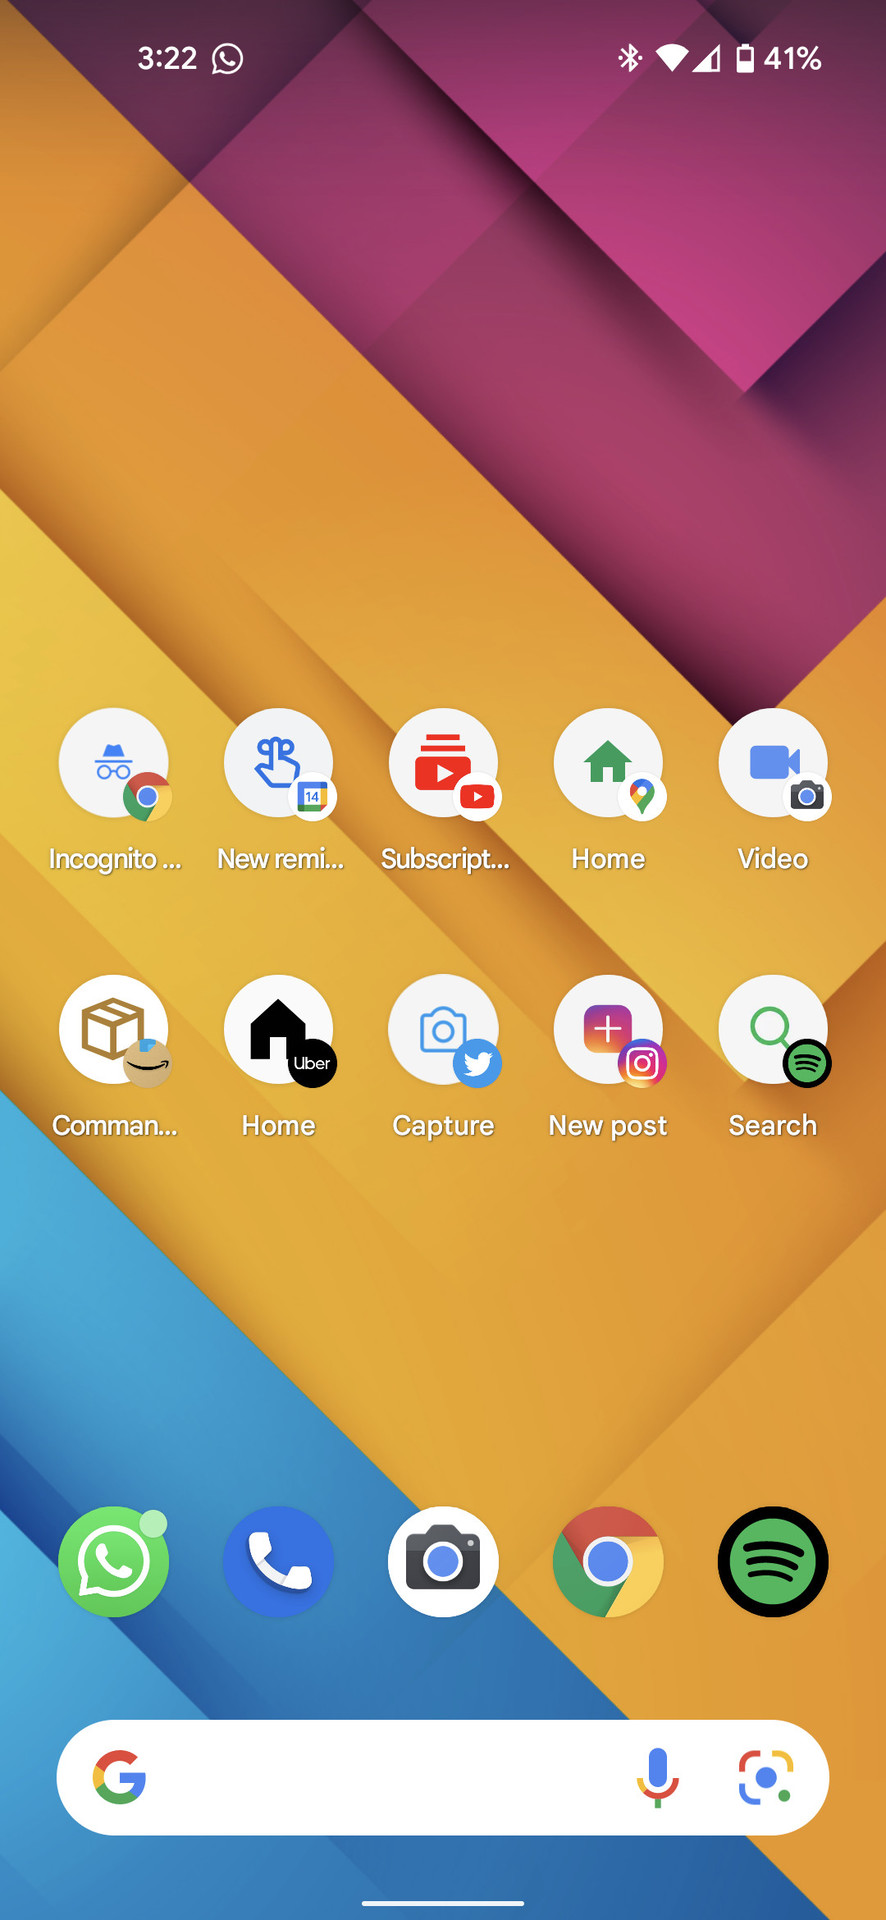 Many useful in-app shortcuts from many Google apps and other services